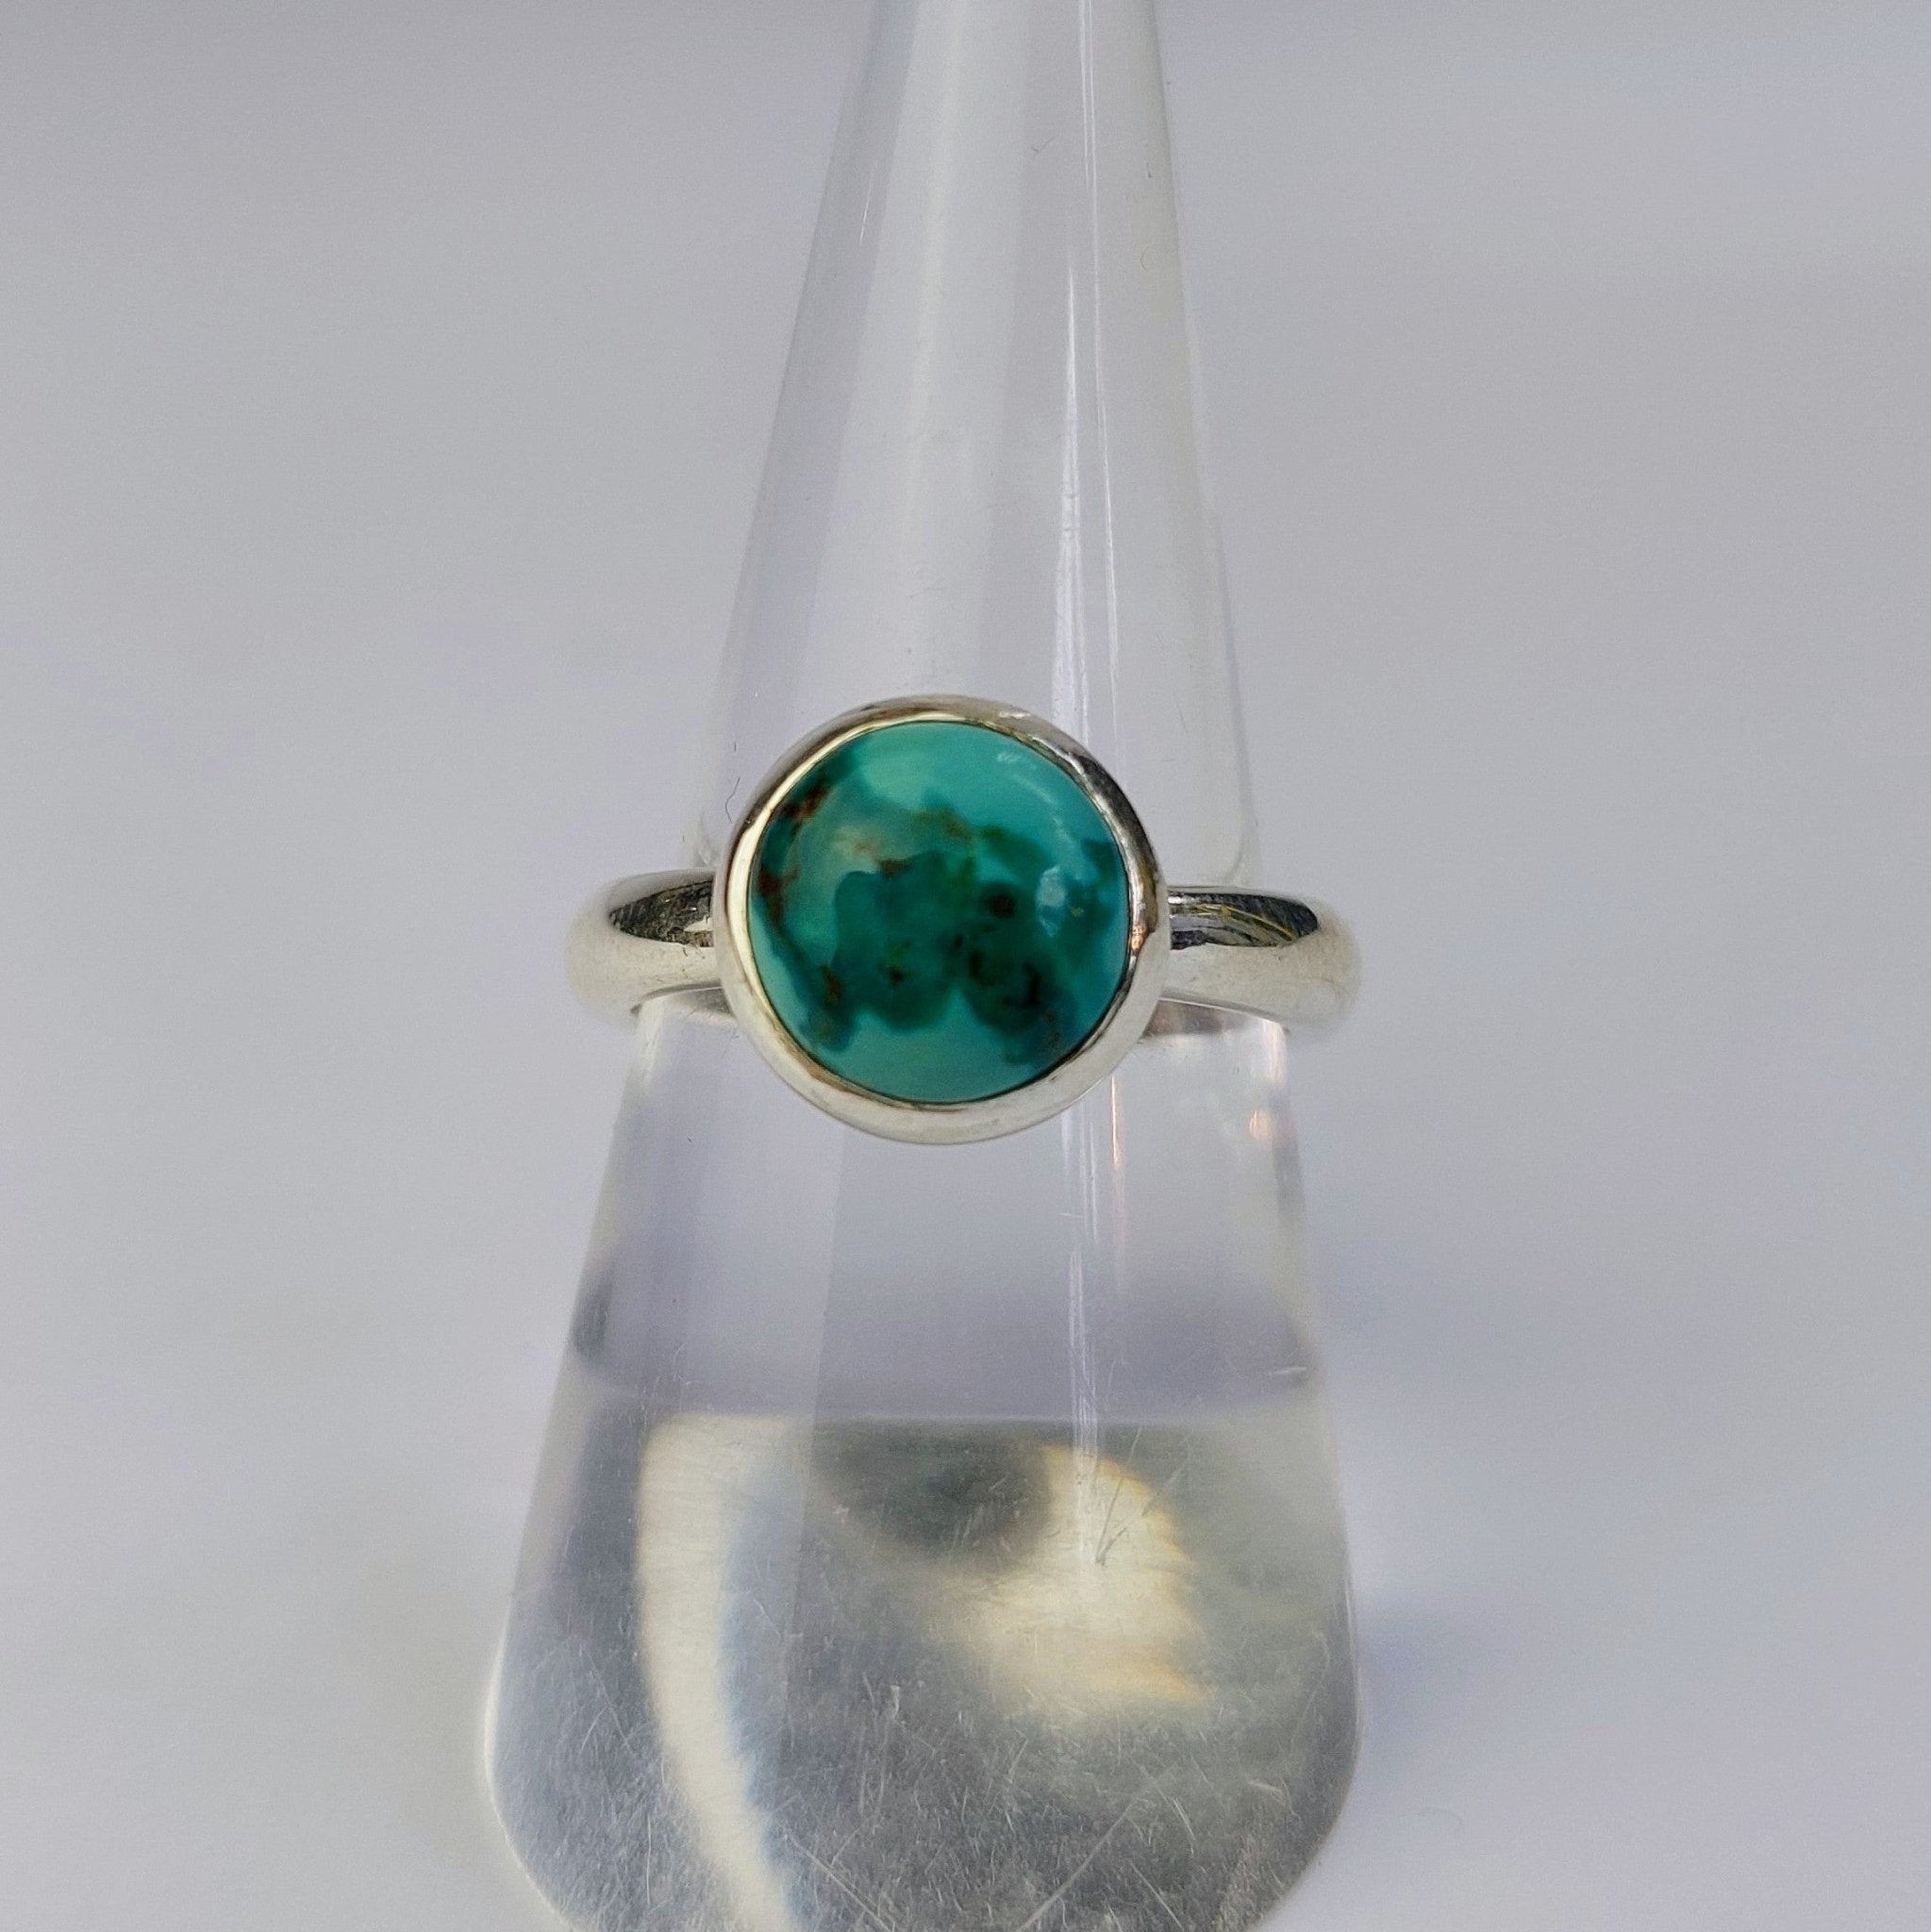 Turquoise Ring - The Nancy Smillie Shop - Art, Jewellery & Designer Gifts Glasgow